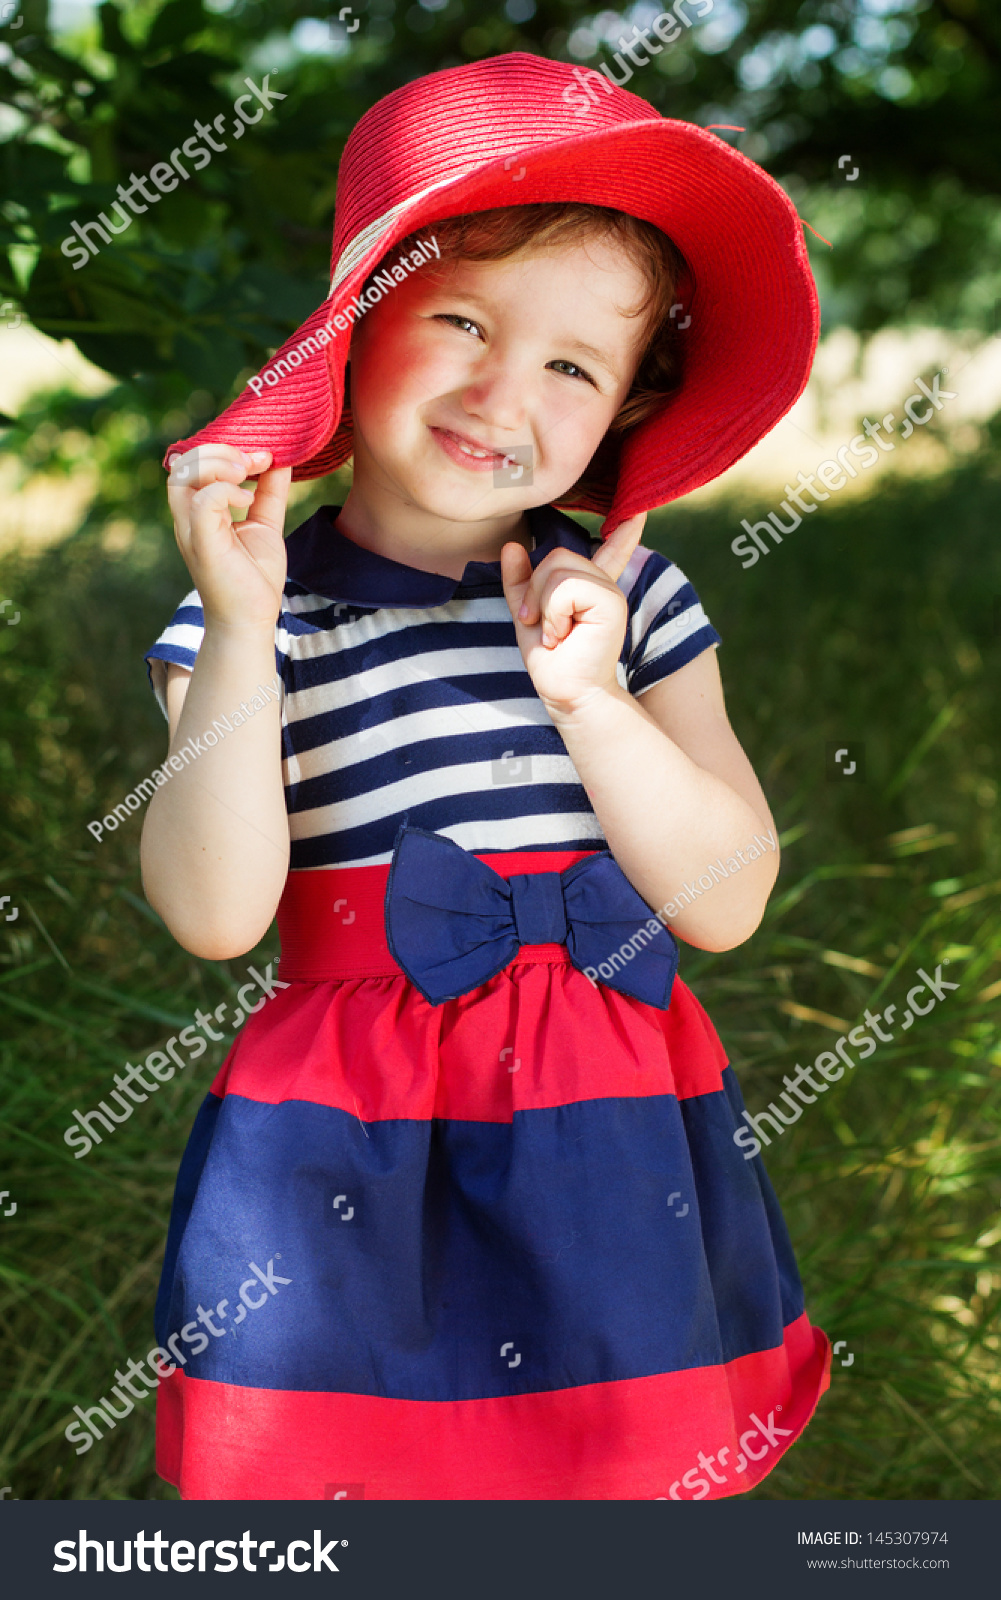 baby girl red hat